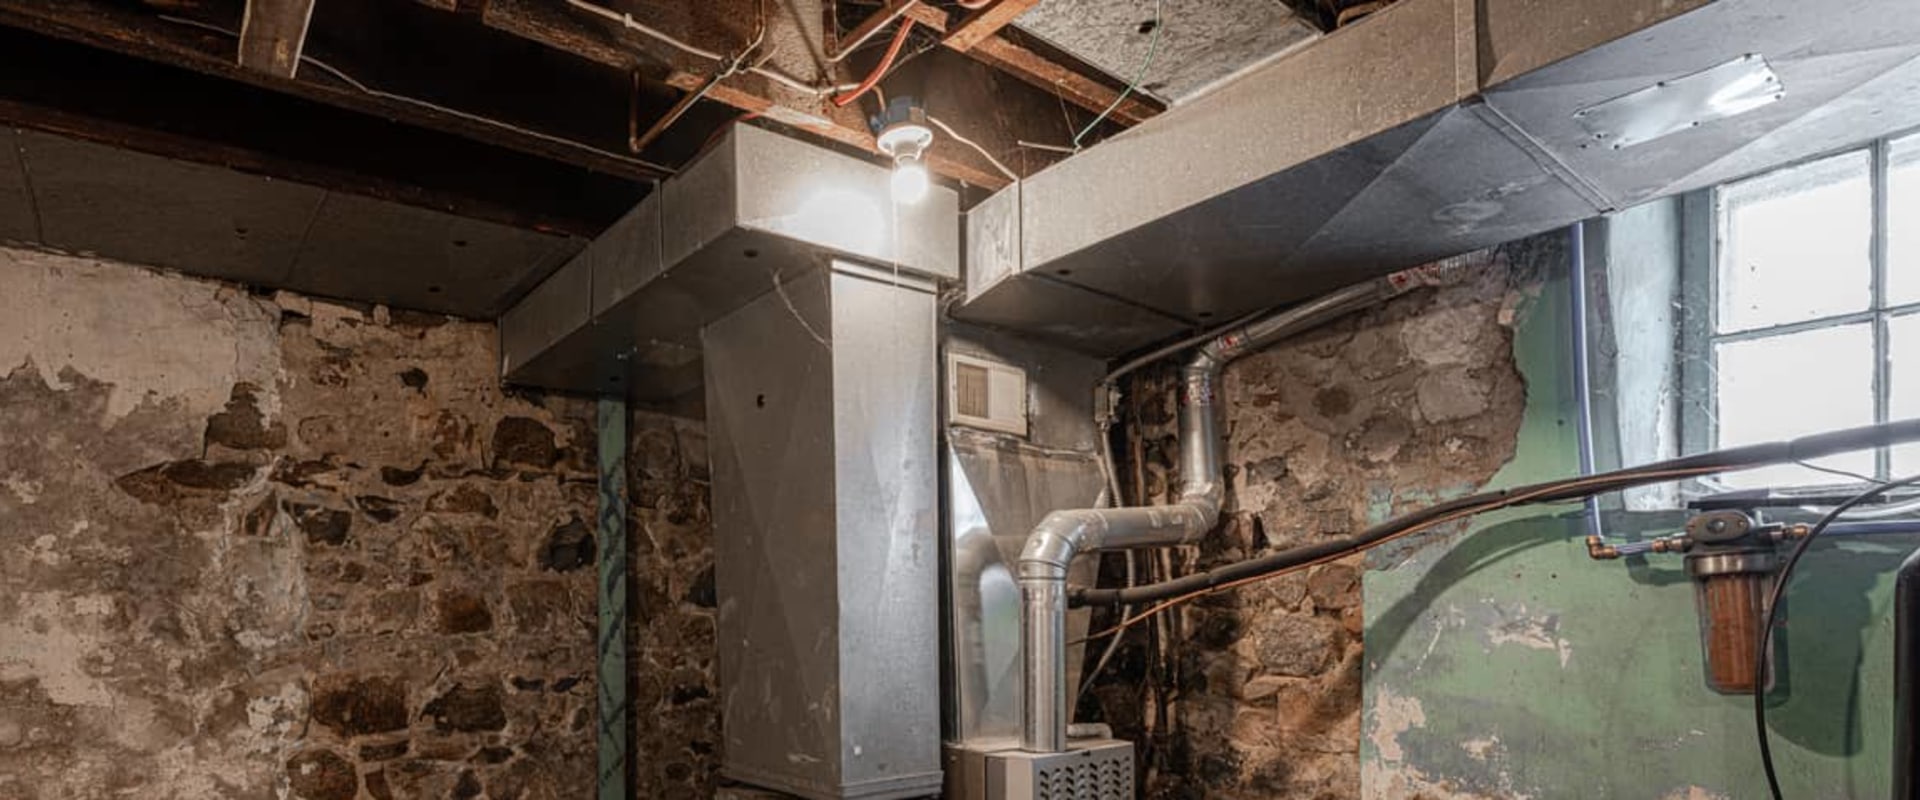 How Long Does It Take to Install a New Furnace? - A Comprehensive Guide